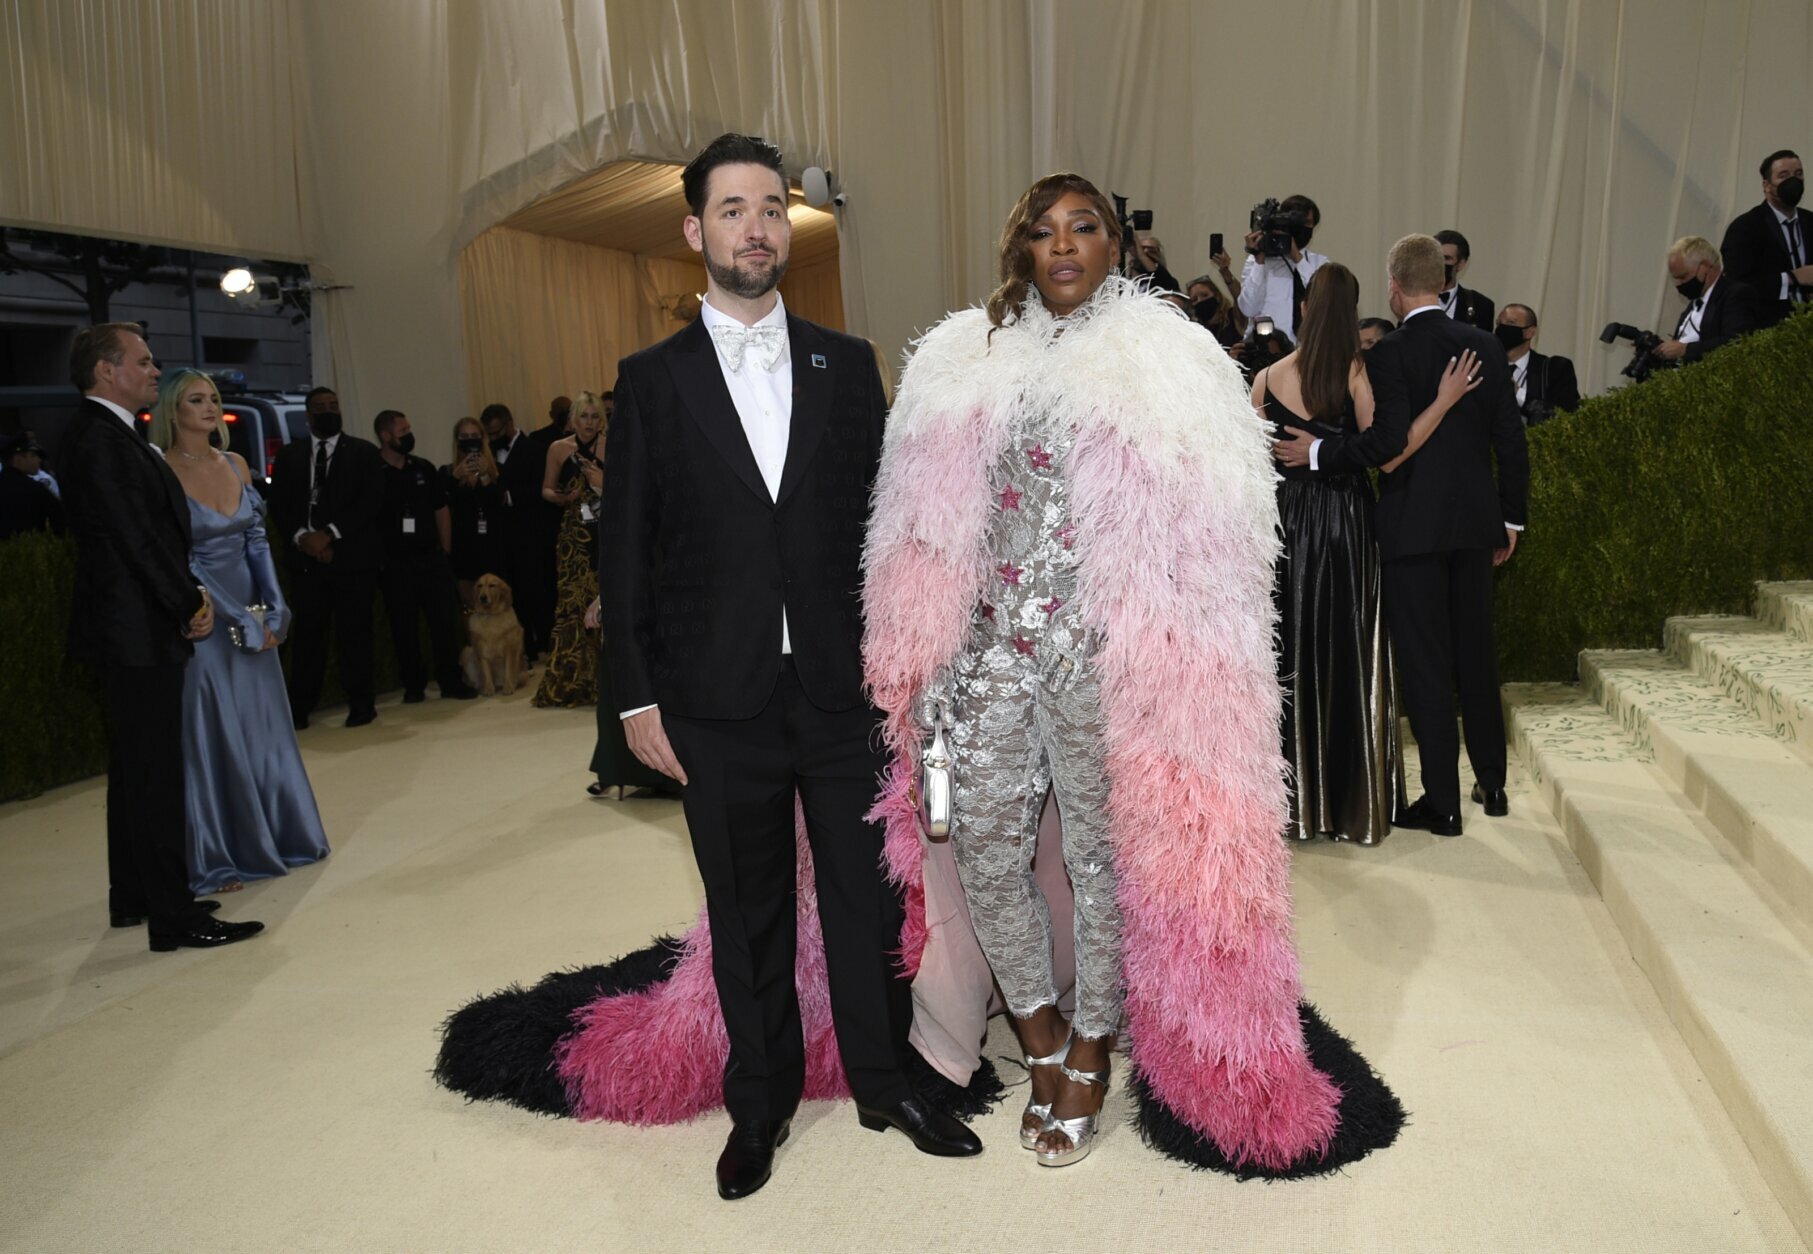 Inside Met Gala, where there’s always someone more famous WTOP News